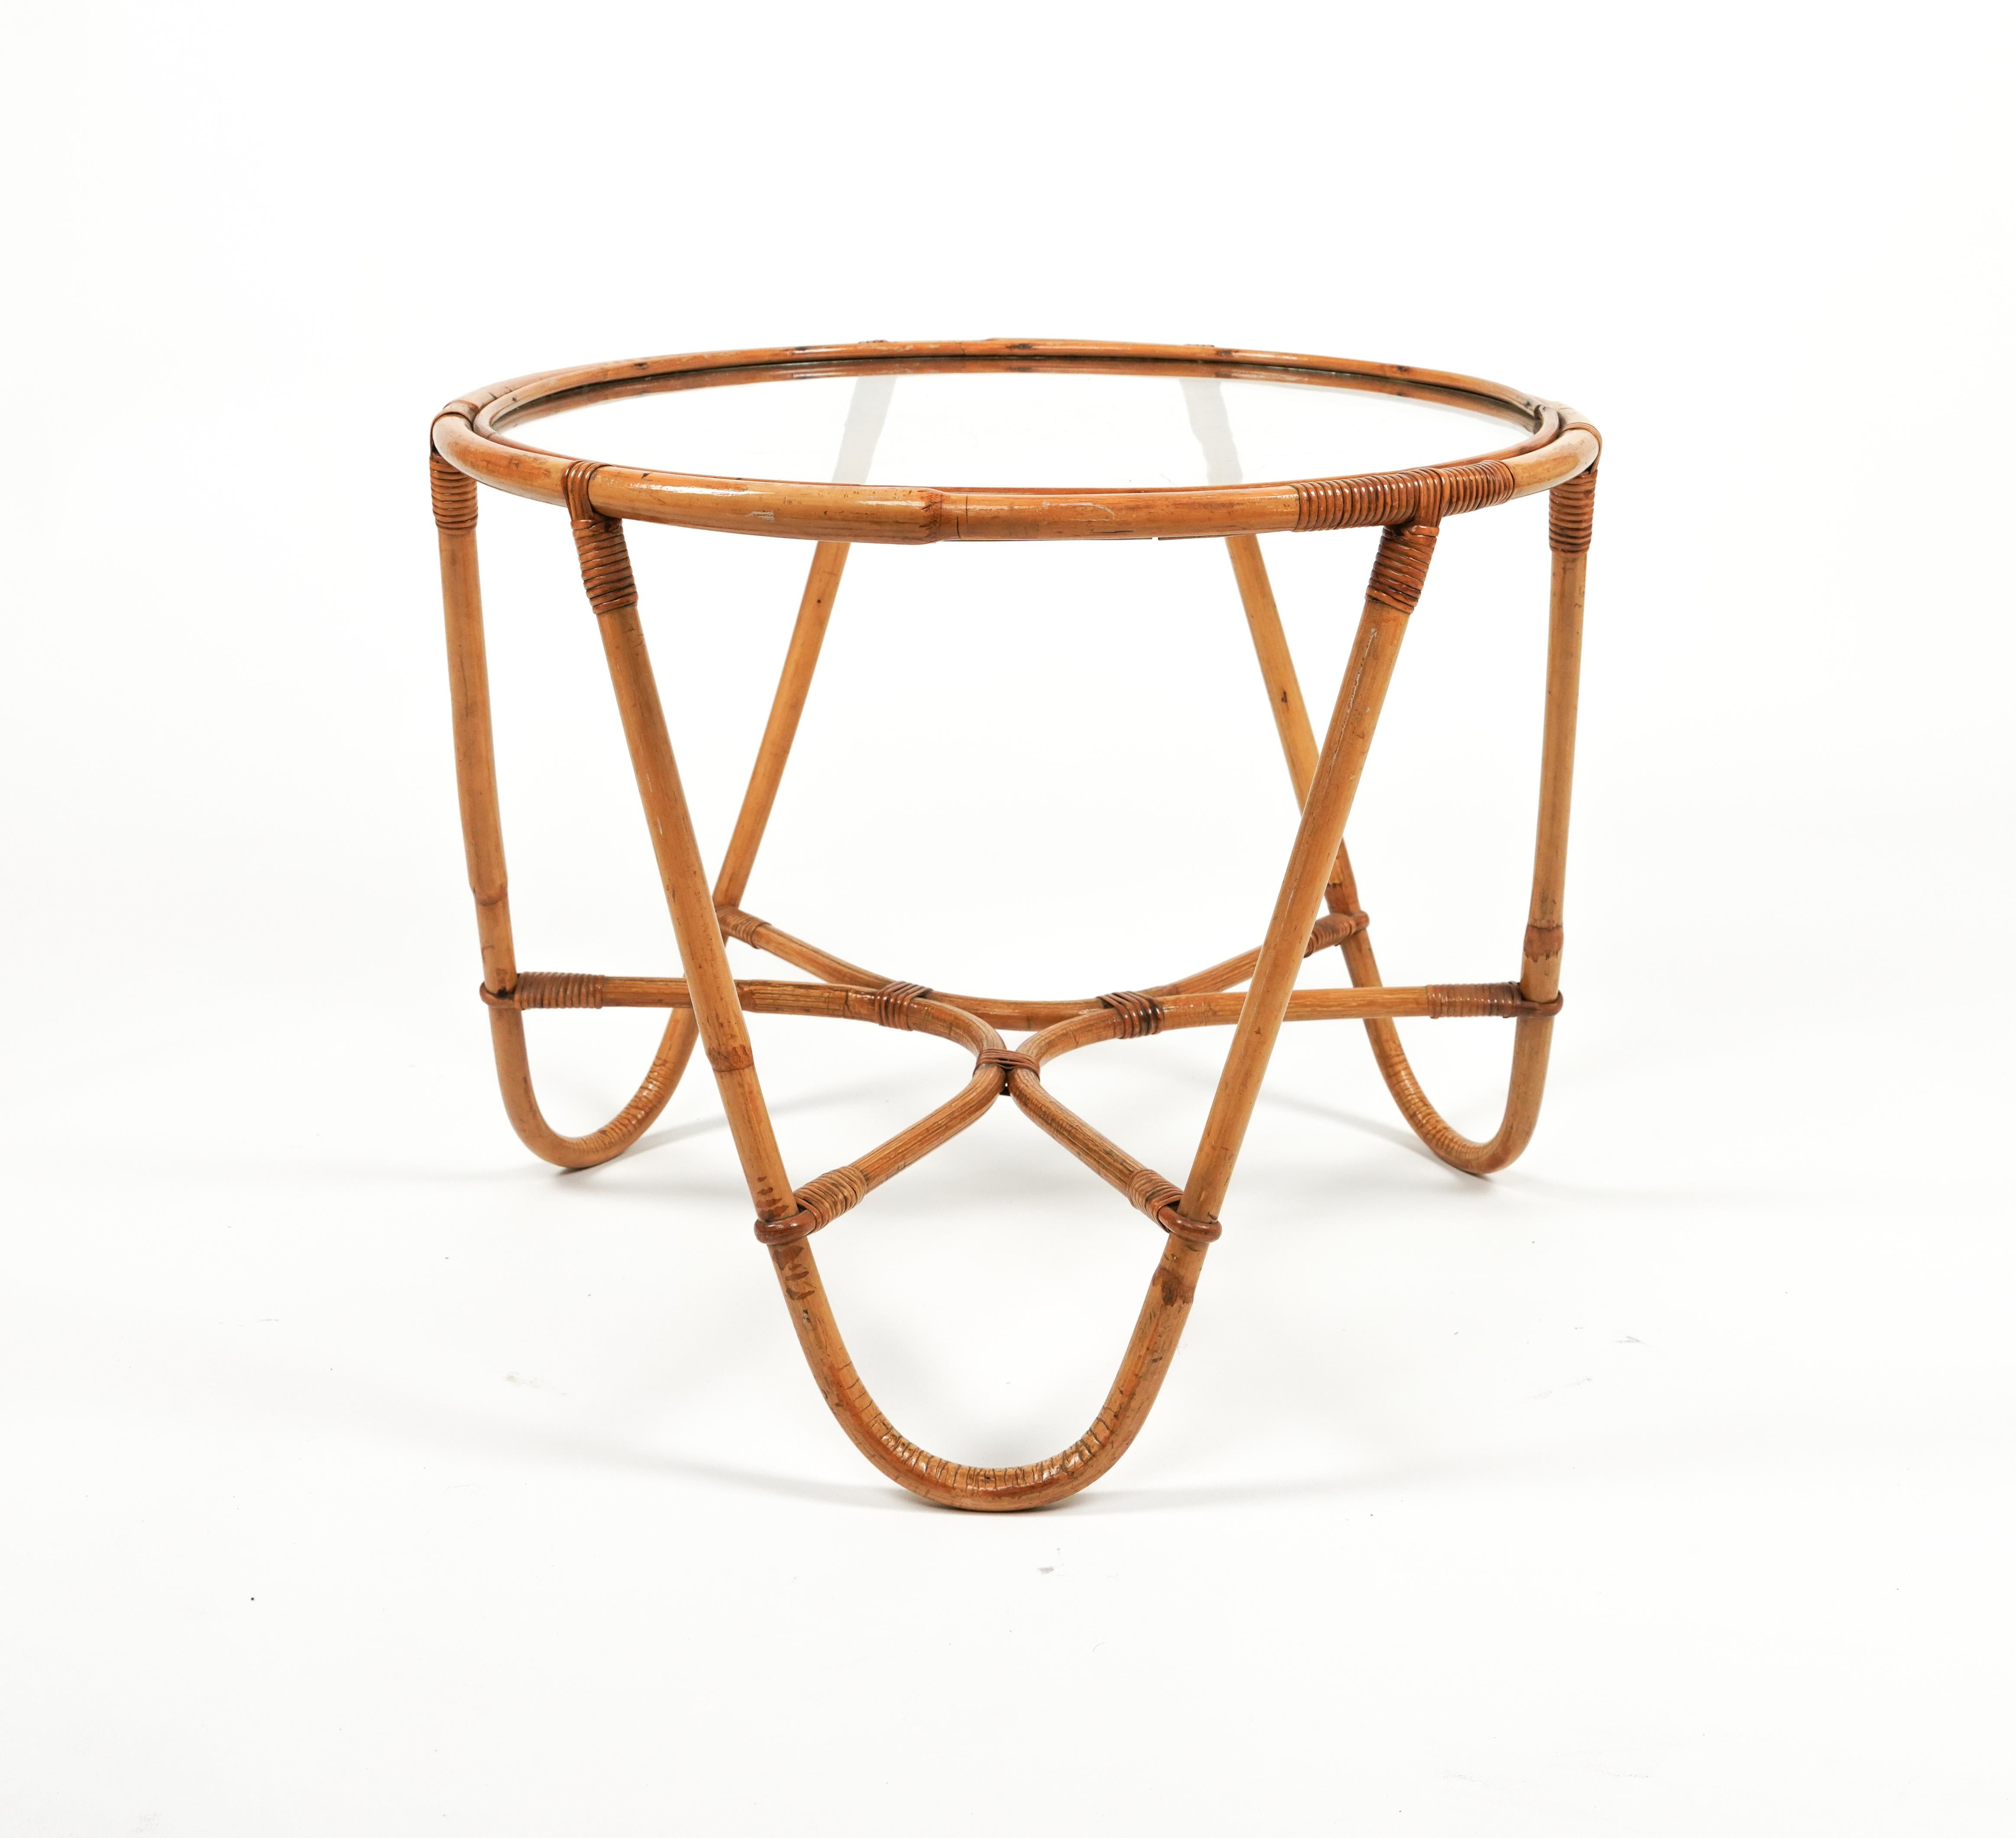 Italian Midcentury Round Coffee Table in Bamboo, Rattan and Glass, Italy 1960s For Sale